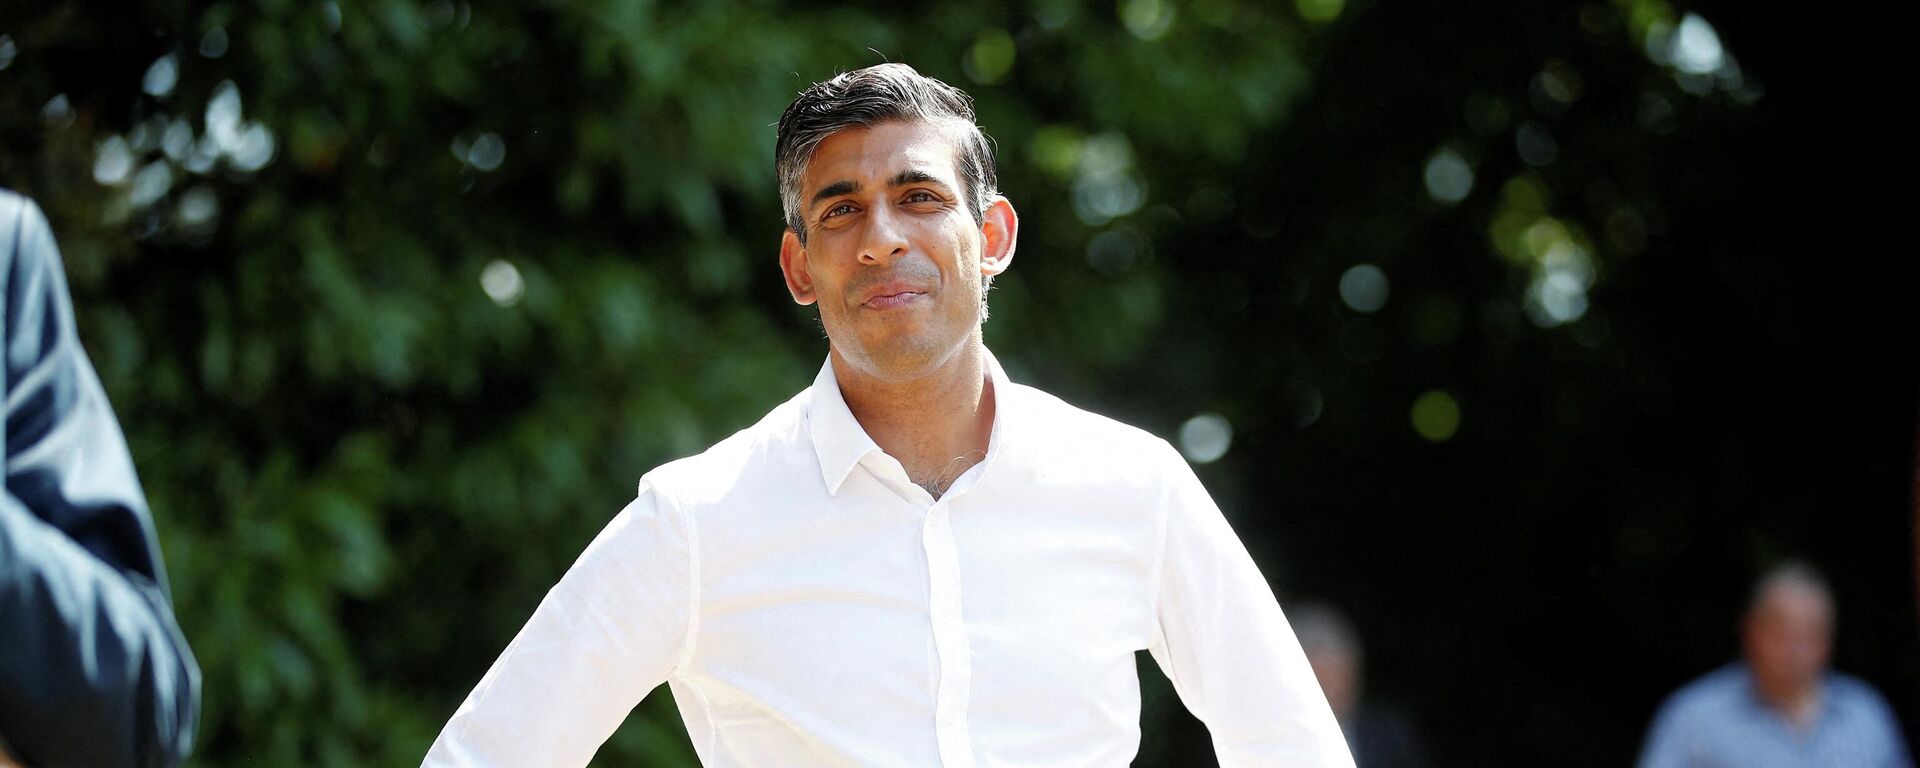 Rishi Sunak, candidate to become Britain's next prime minister and Conservative party leader, attends a campaign event in Tunbridge Wells, Kent, on July 29, 2022 - Sputnik International, 1920, 01.08.2022